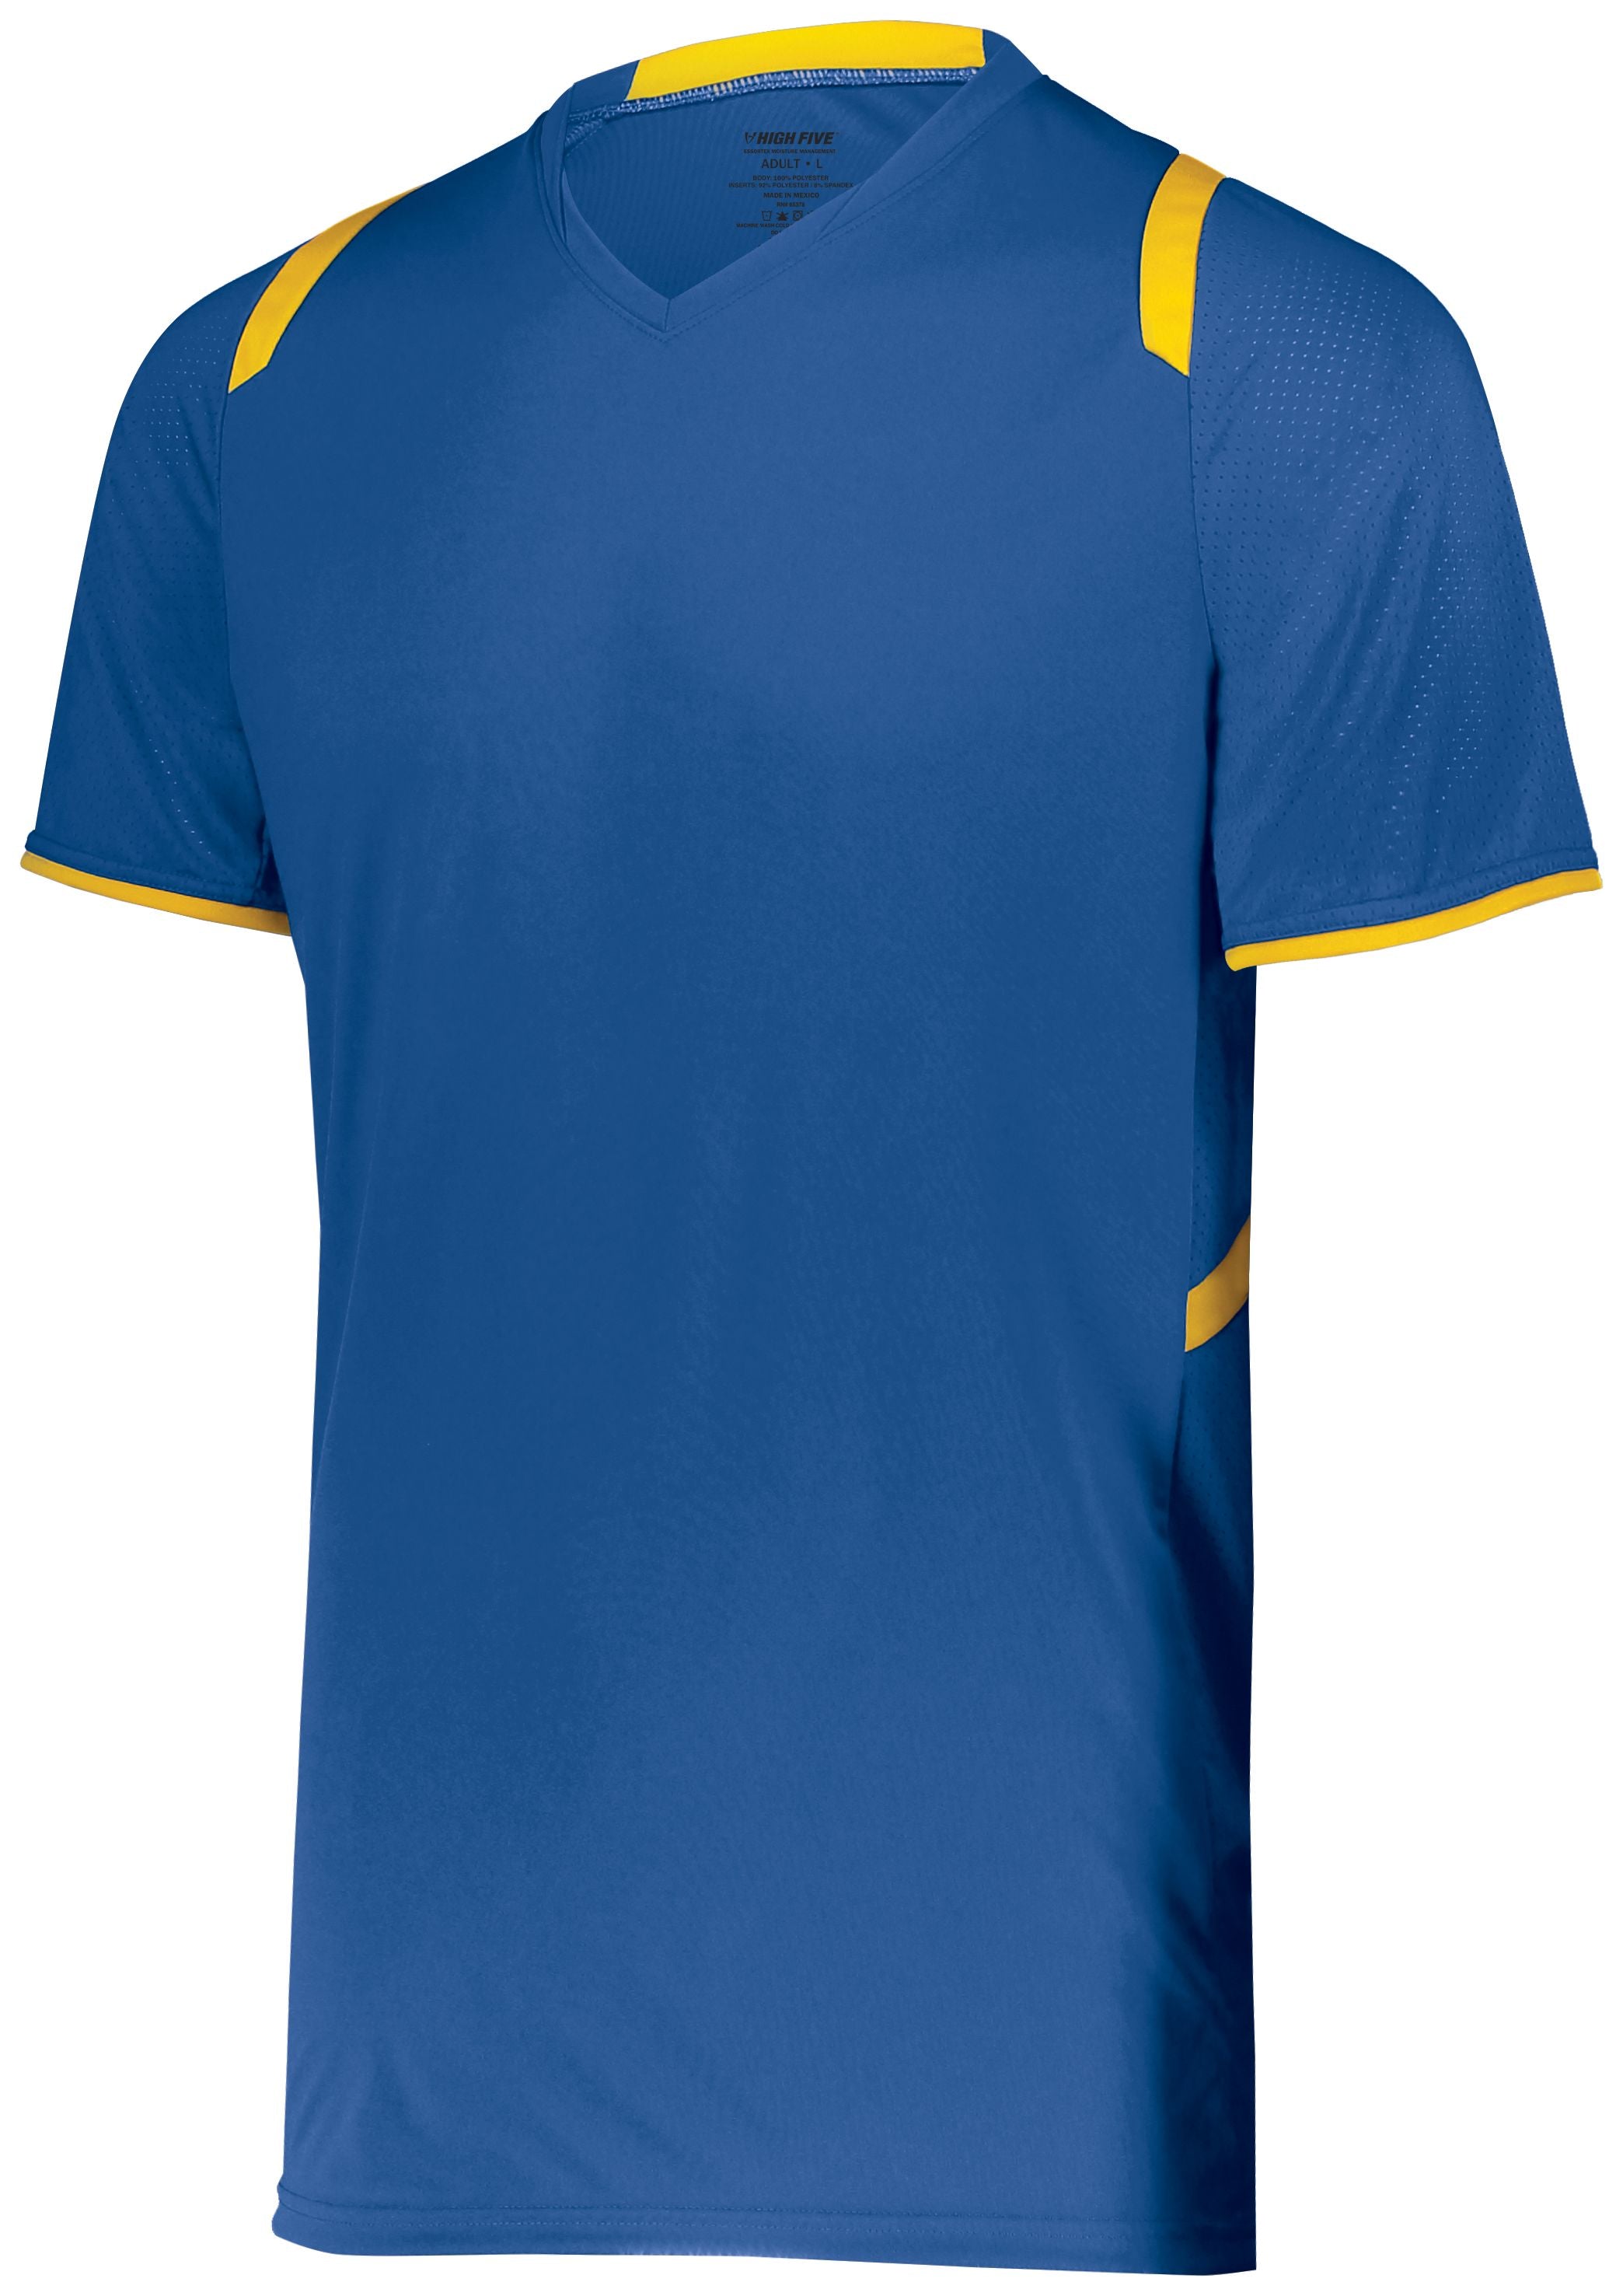 High 5 Youth Millennium Soccer Jersey in Royal/Athletic Gold  -Part of the Youth, Youth-Jersey, High5-Products, Soccer, Shirts, All-Sports-1 product lines at KanaleyCreations.com